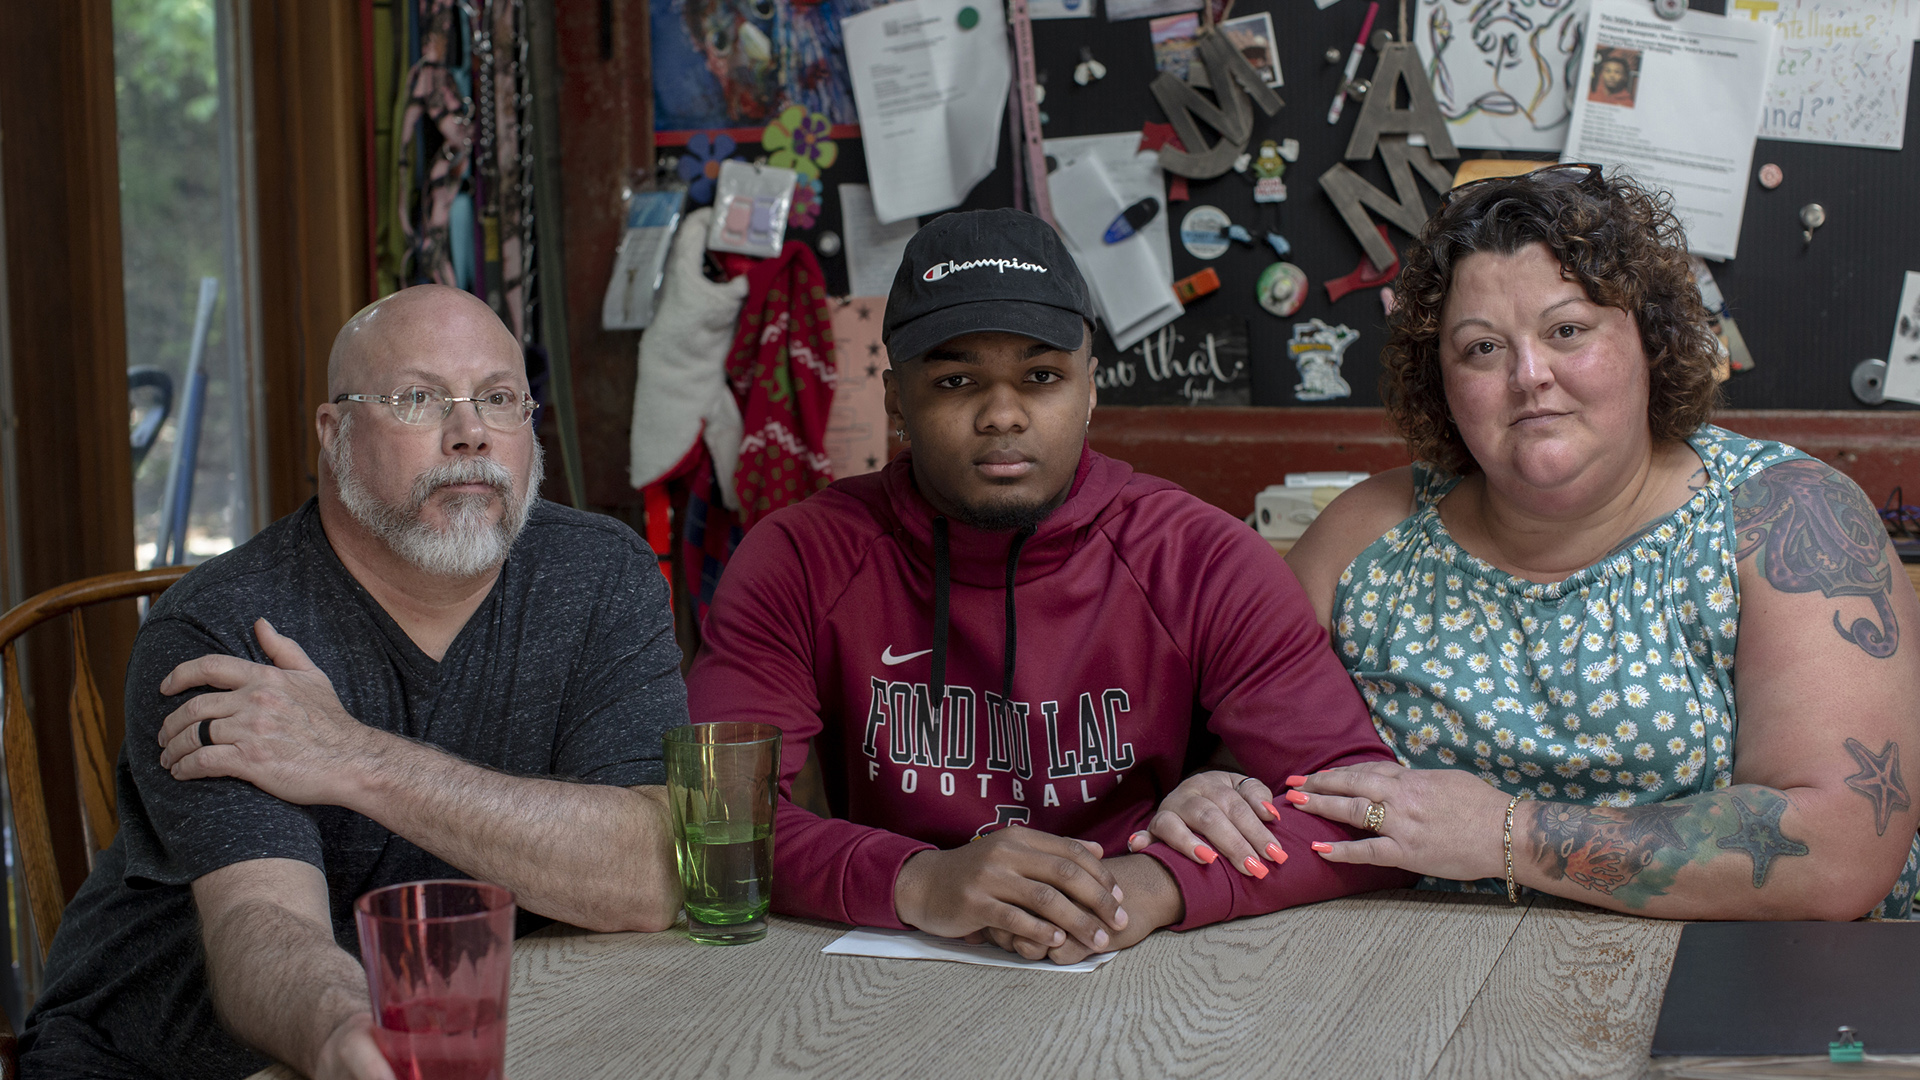 Dan, Armond and Amy Wempner sit at a table, with a window and a bulletin board covered with pins, papers and other items in the background.